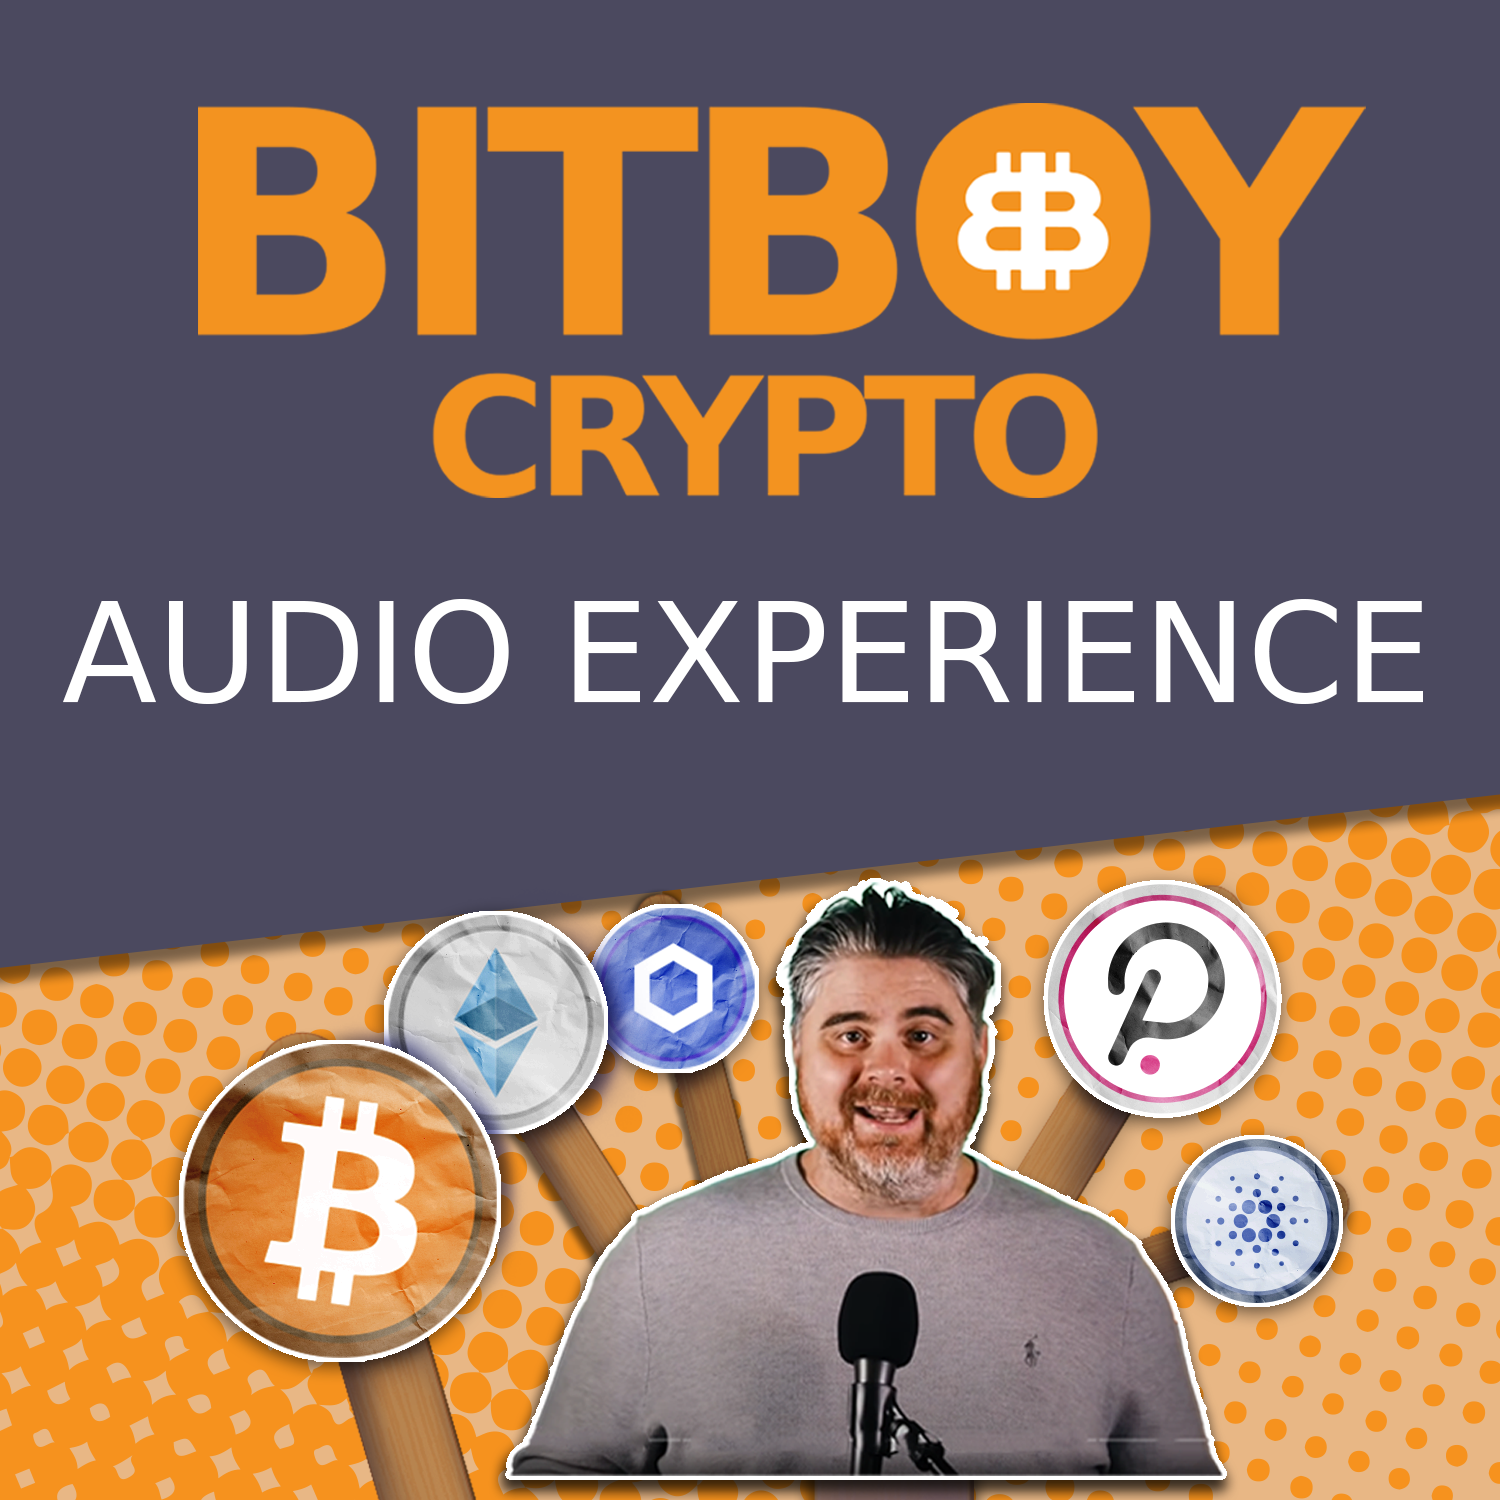 Fresh update on "nicks" discussed on The Bitboy Crypto Podcast